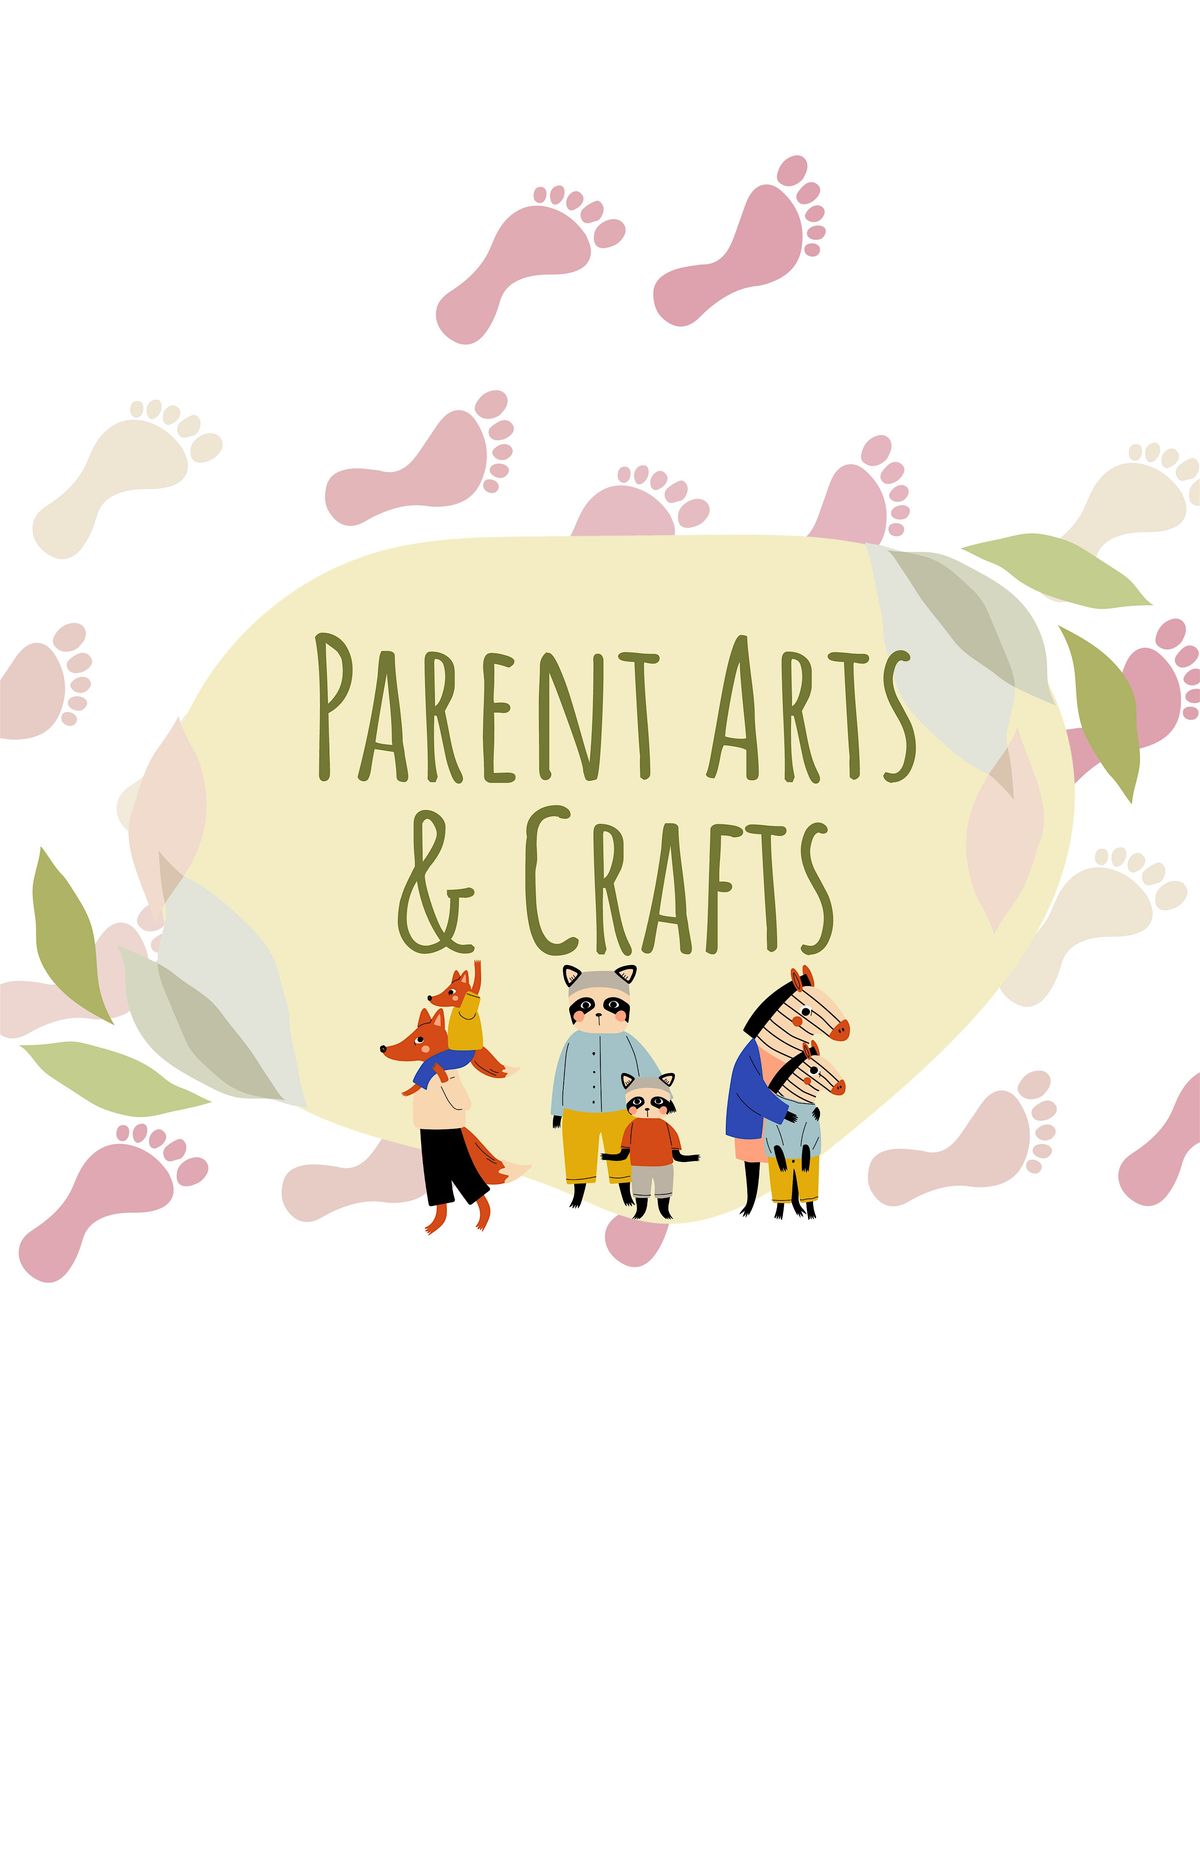 Parent Arts & crafts - two week clay fun part 1